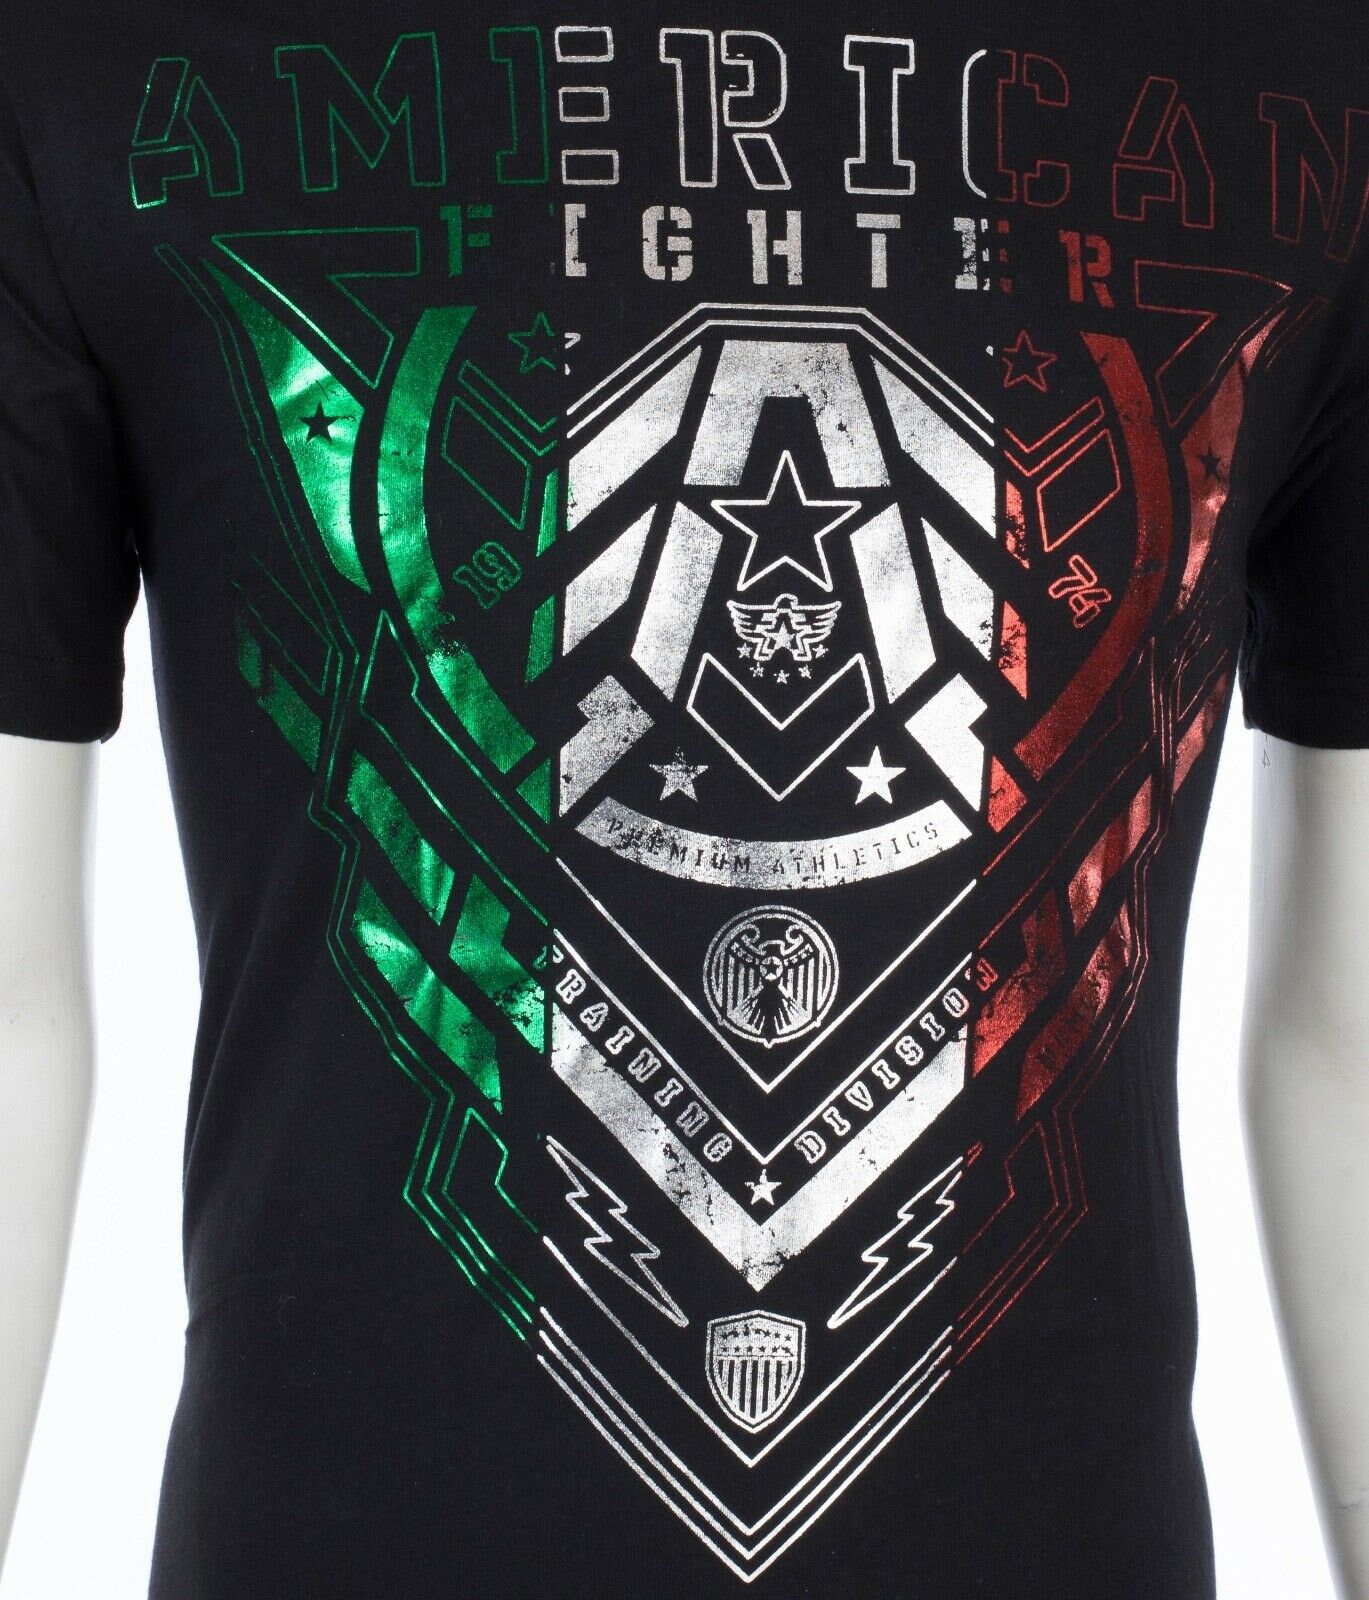 MMA Fighter Ground and Pound - Camisa MMA' Camiseta hombre